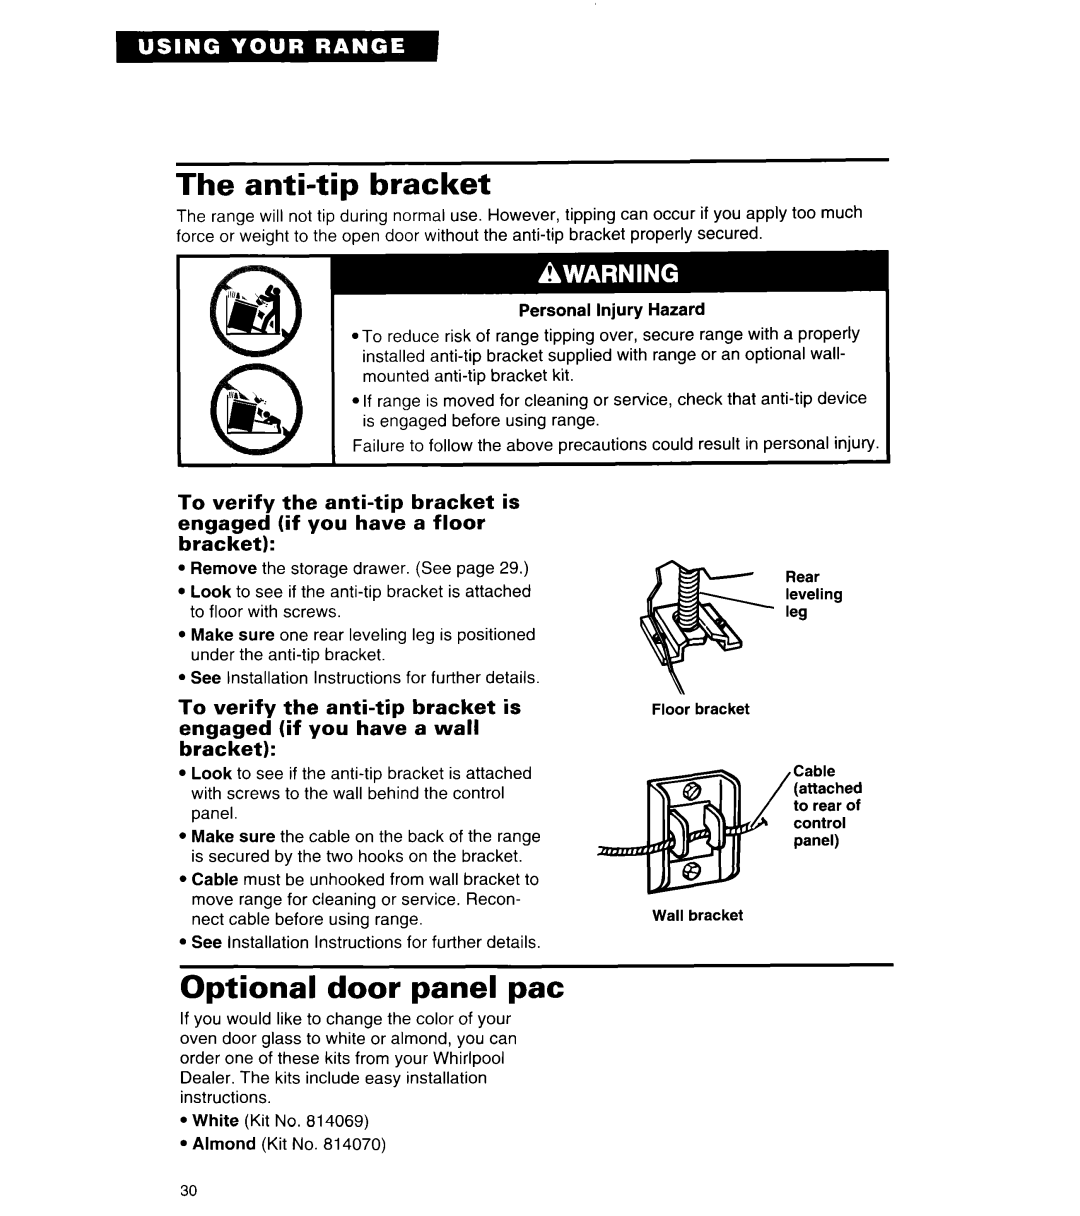 Whirlpool TER56W2B important safety instructions The anti-tipbracket, Optional door panel pat 